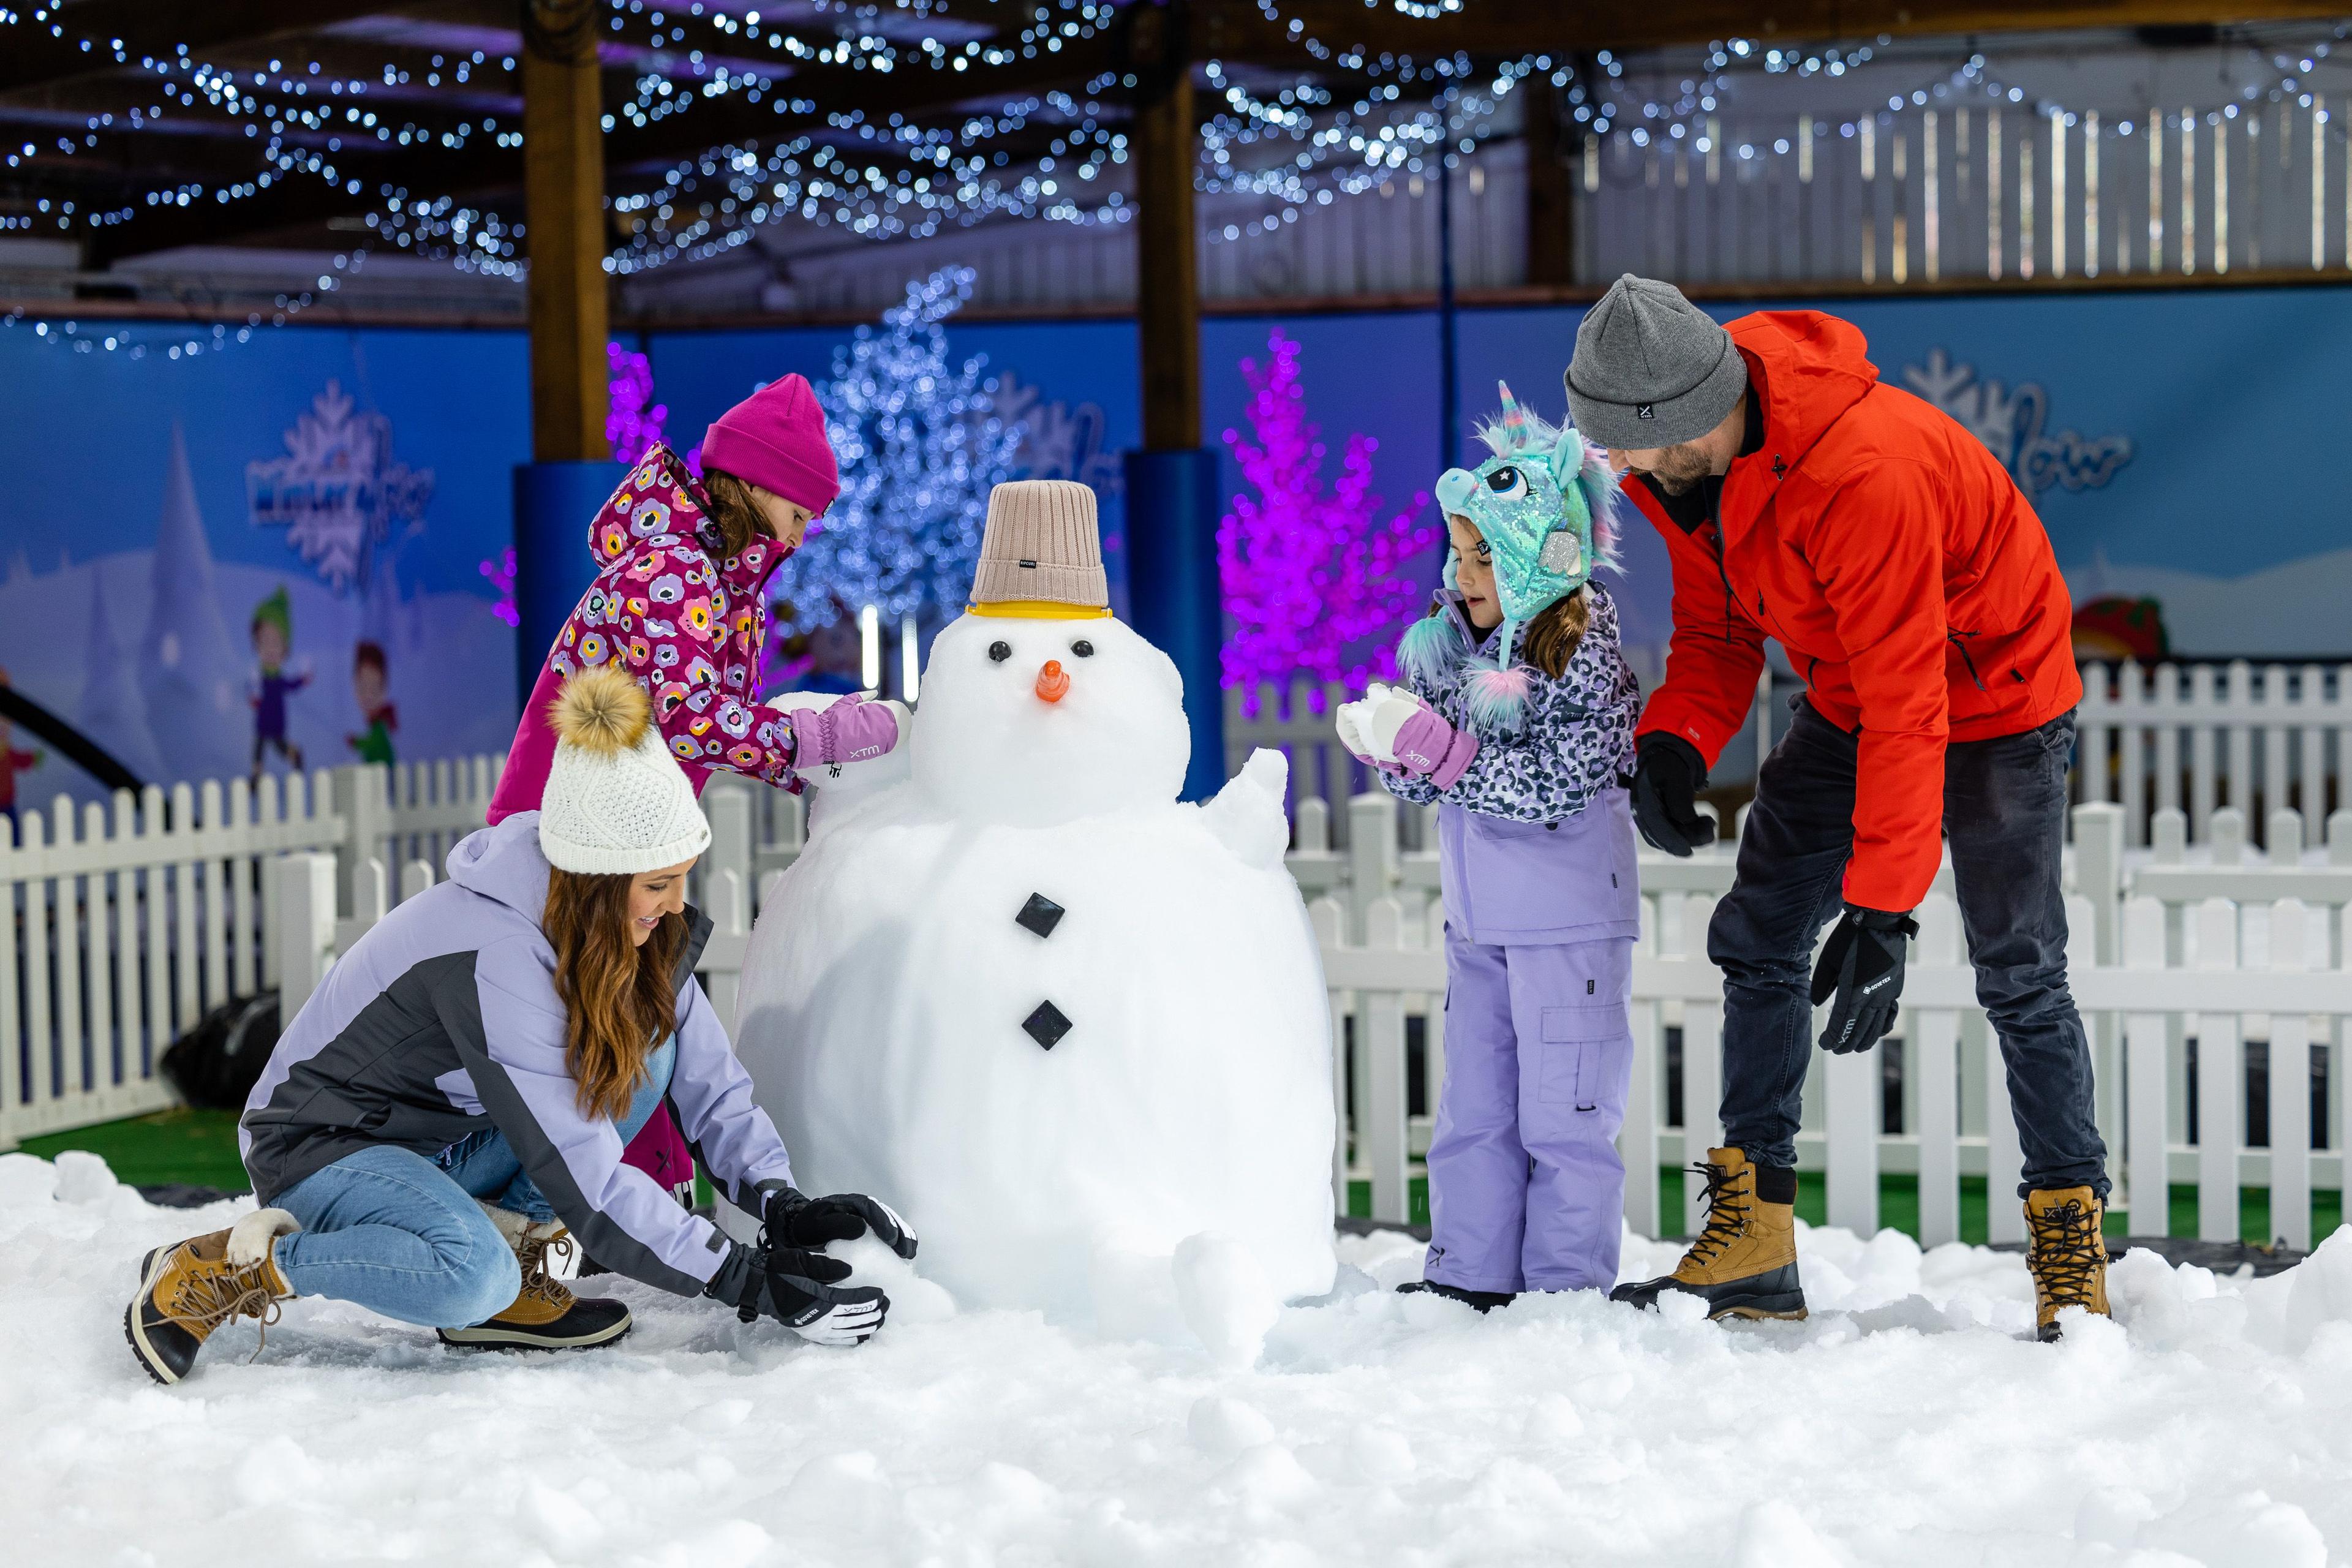 Build a snowman in our massive snow play zone! background